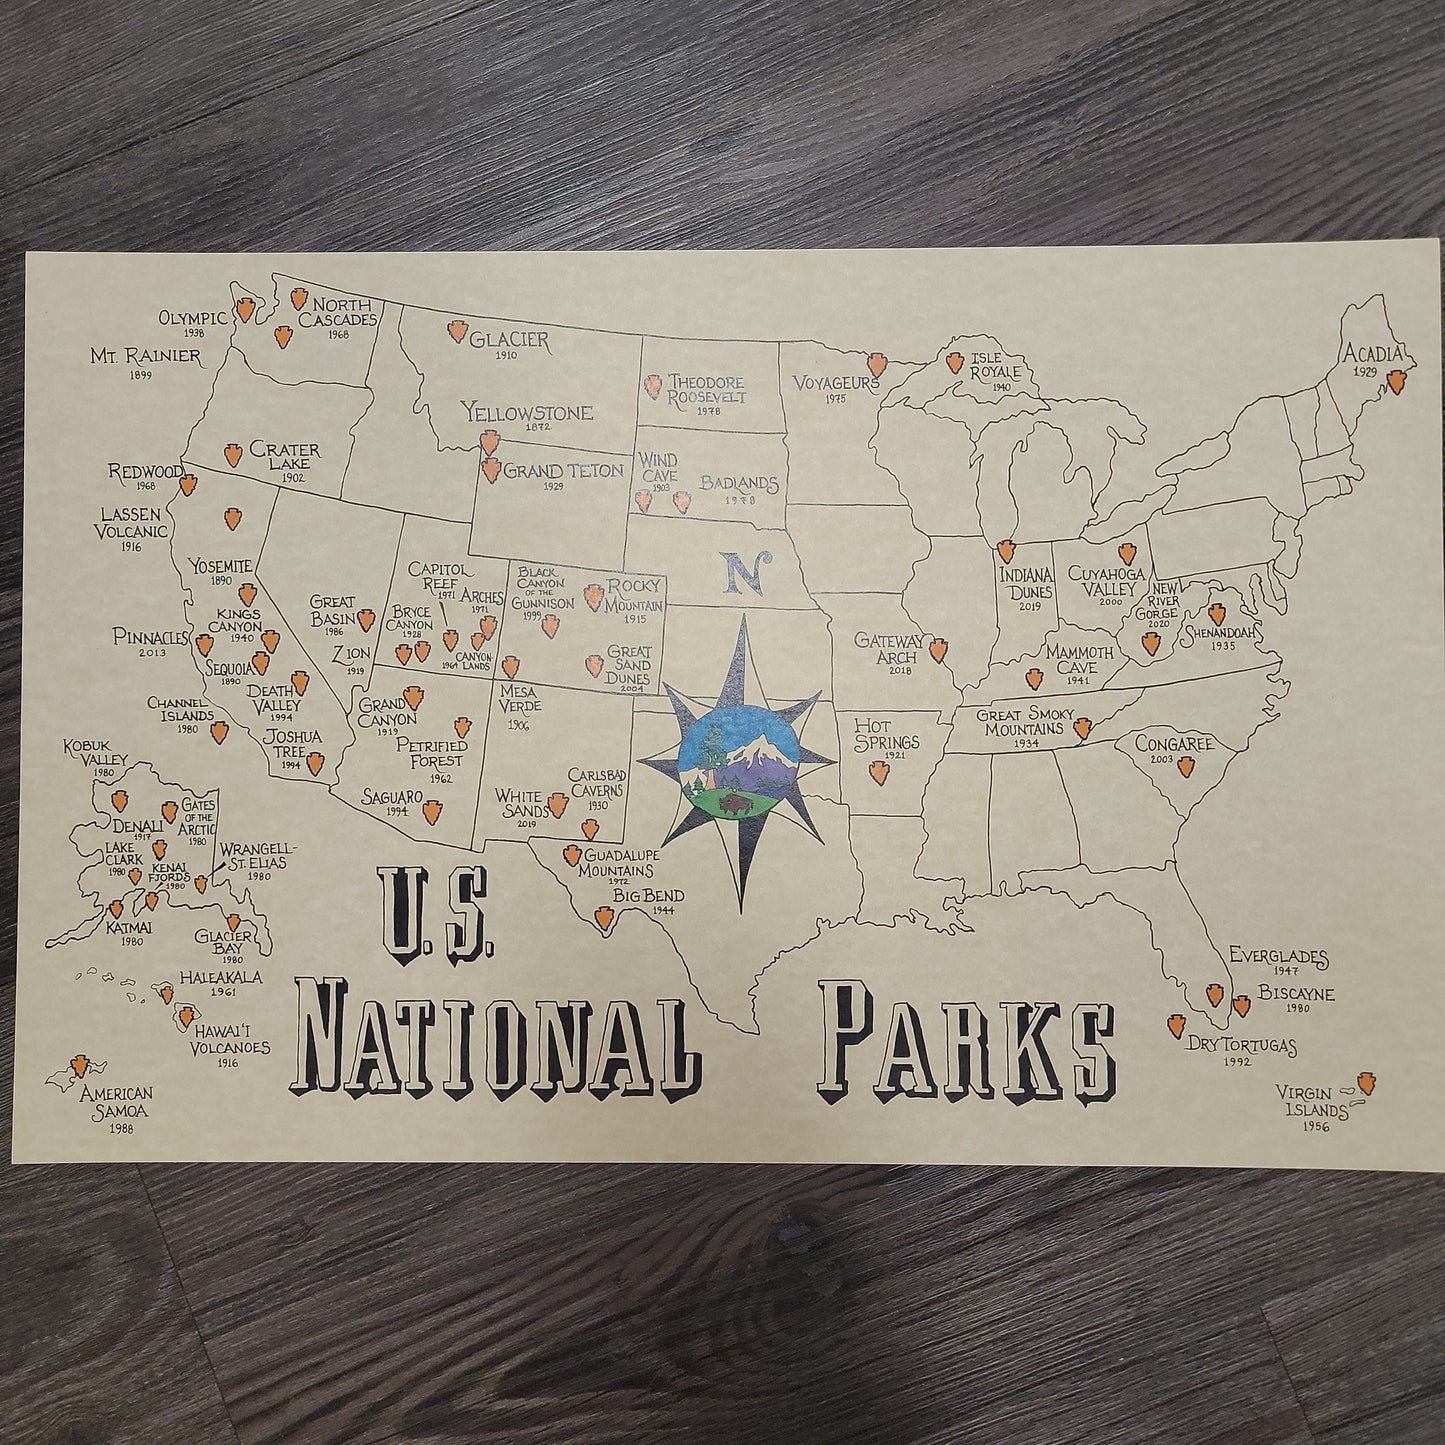 US national parks map